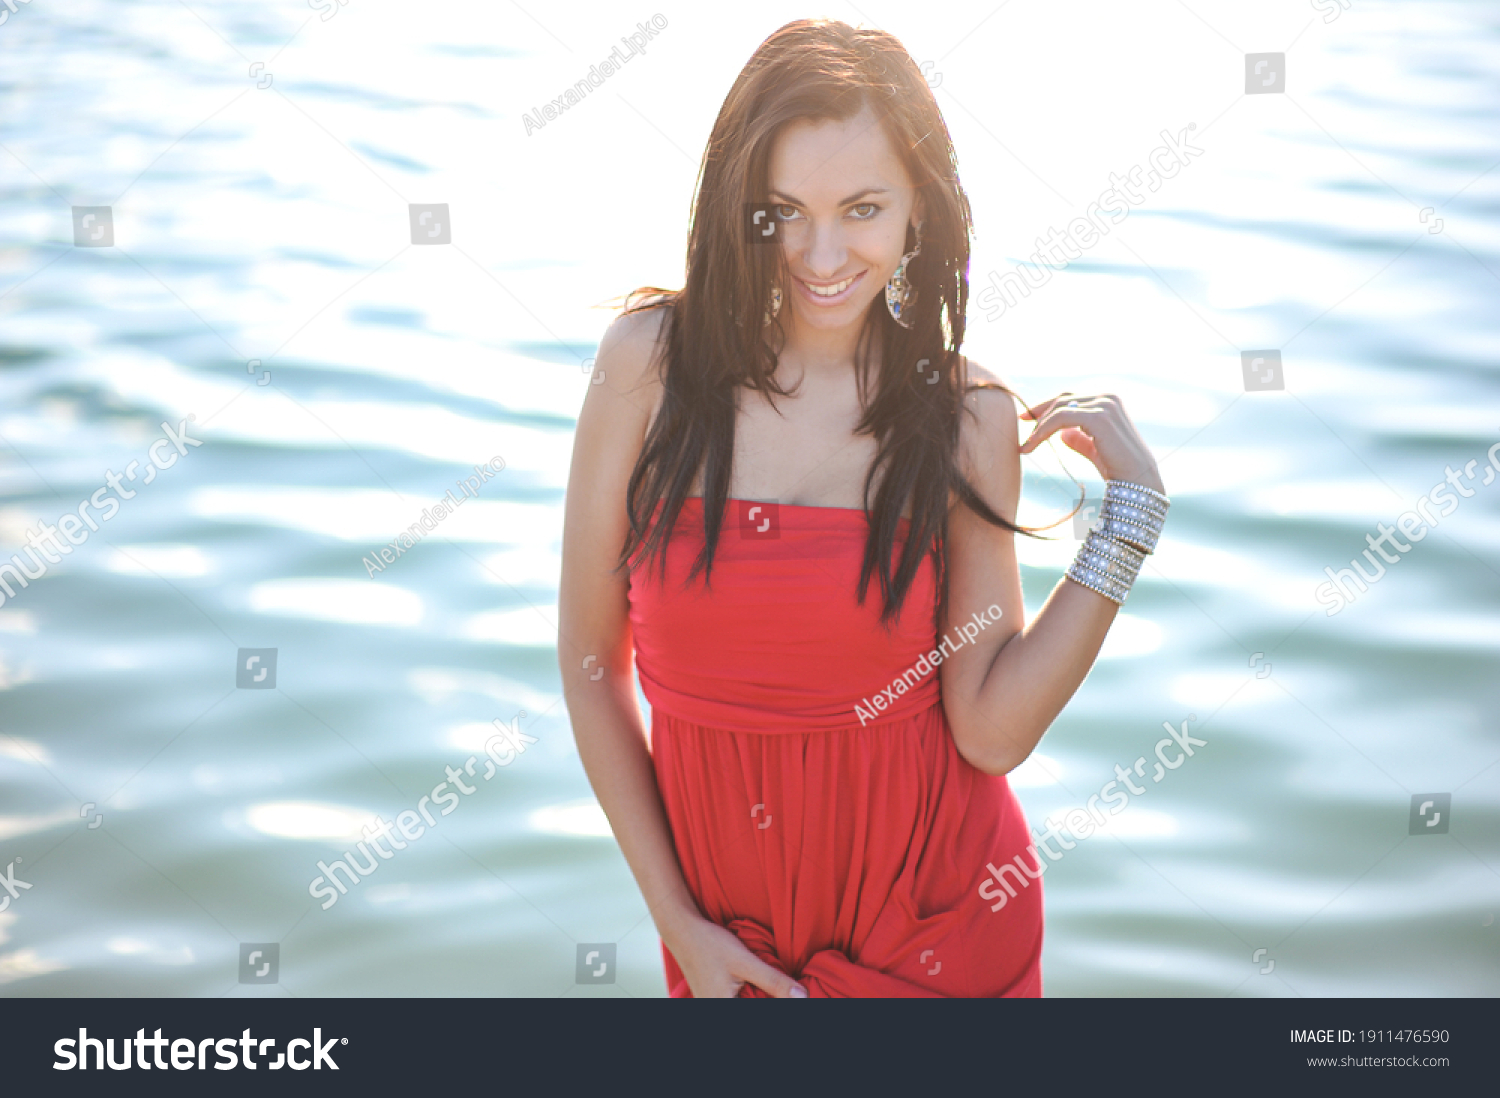 lifestyle photo of woman with perfect hair.walking alone at the beach.Sensual young girl relaxing.Colorful filter.glam style,teen trend outfit, positive mood,smiling,amazing model girl,long hair #1911476590